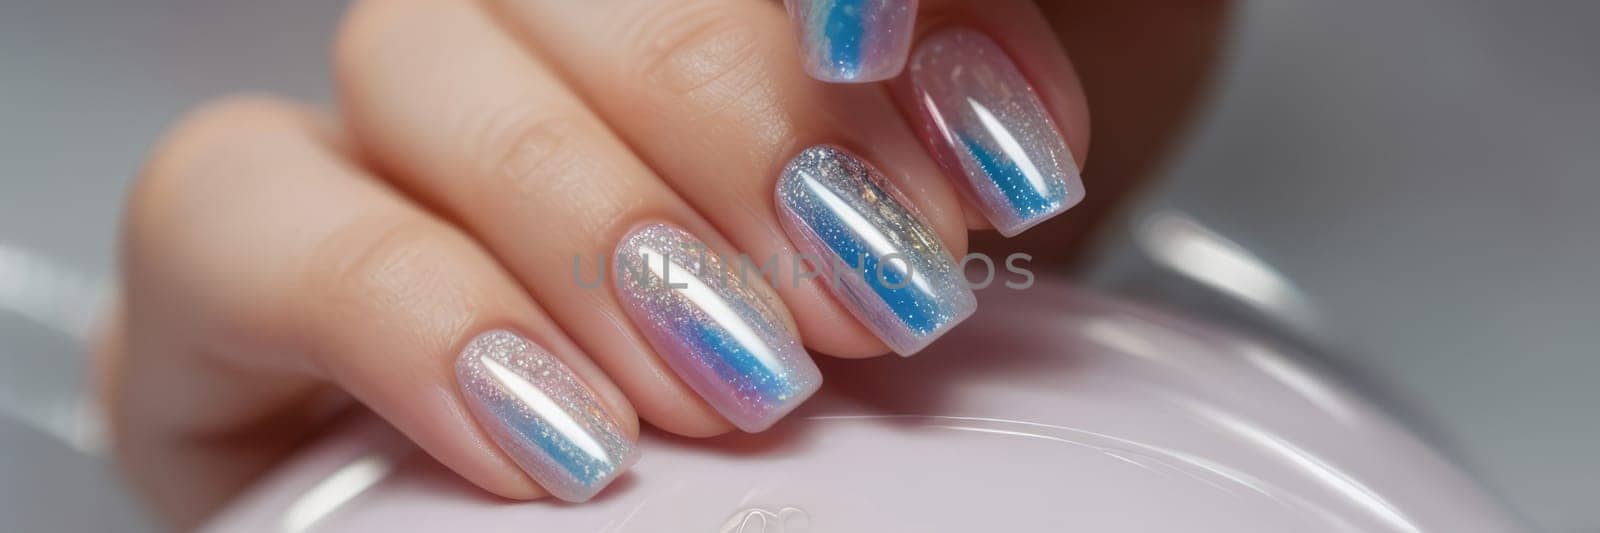 Close-up view of holographic manicure with sparkling gradient colors